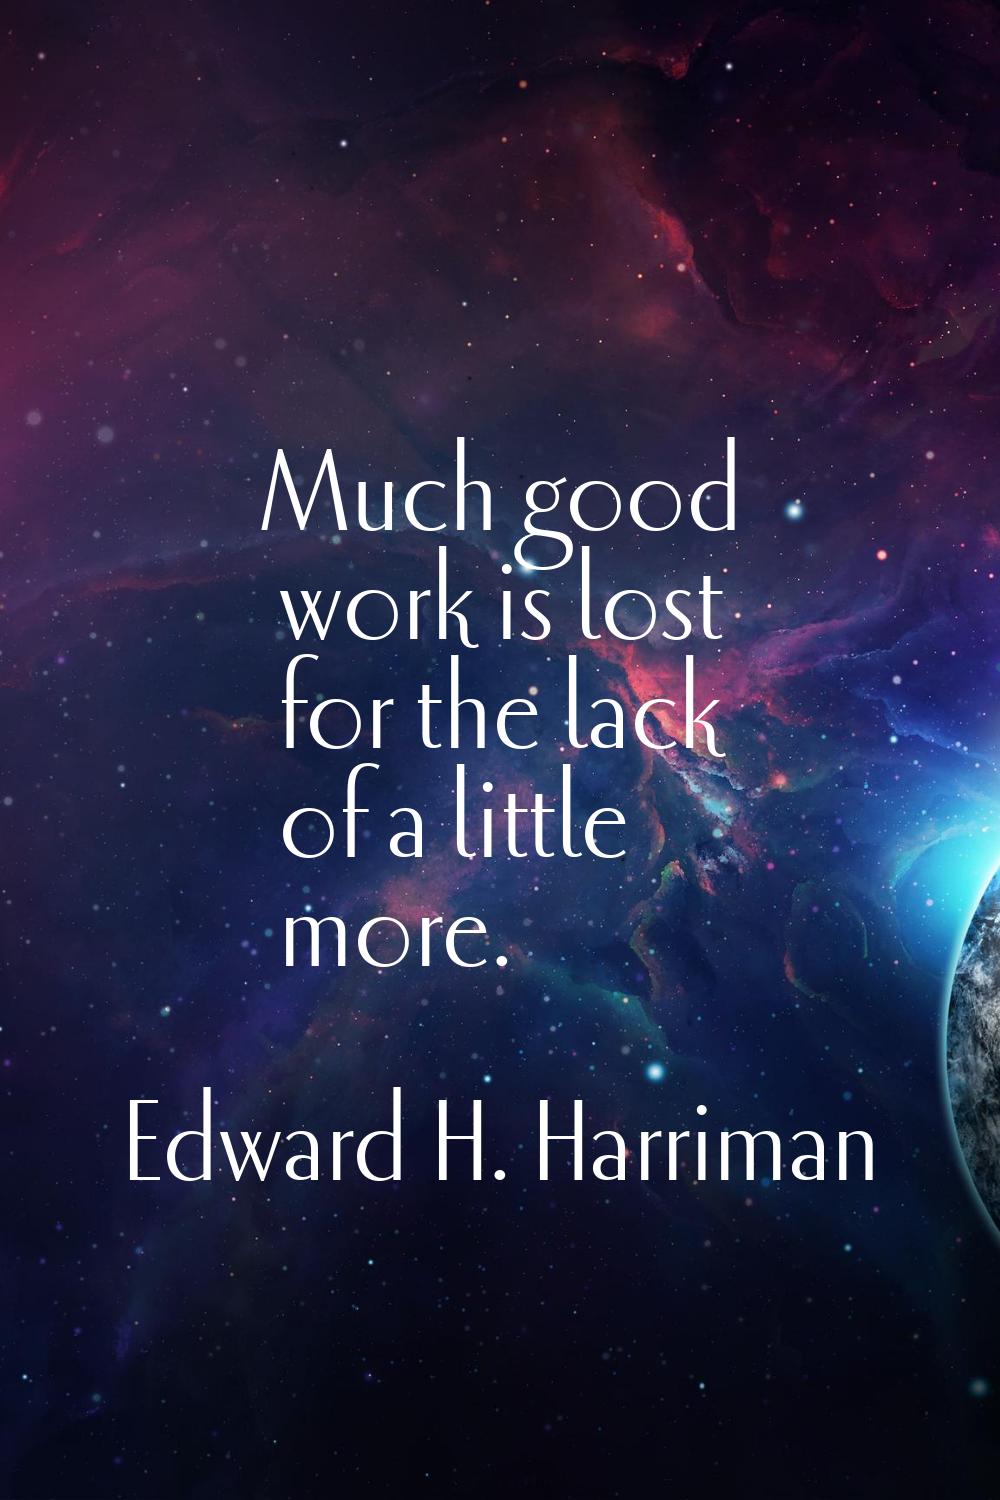 Much good work is lost for the lack of a little more.